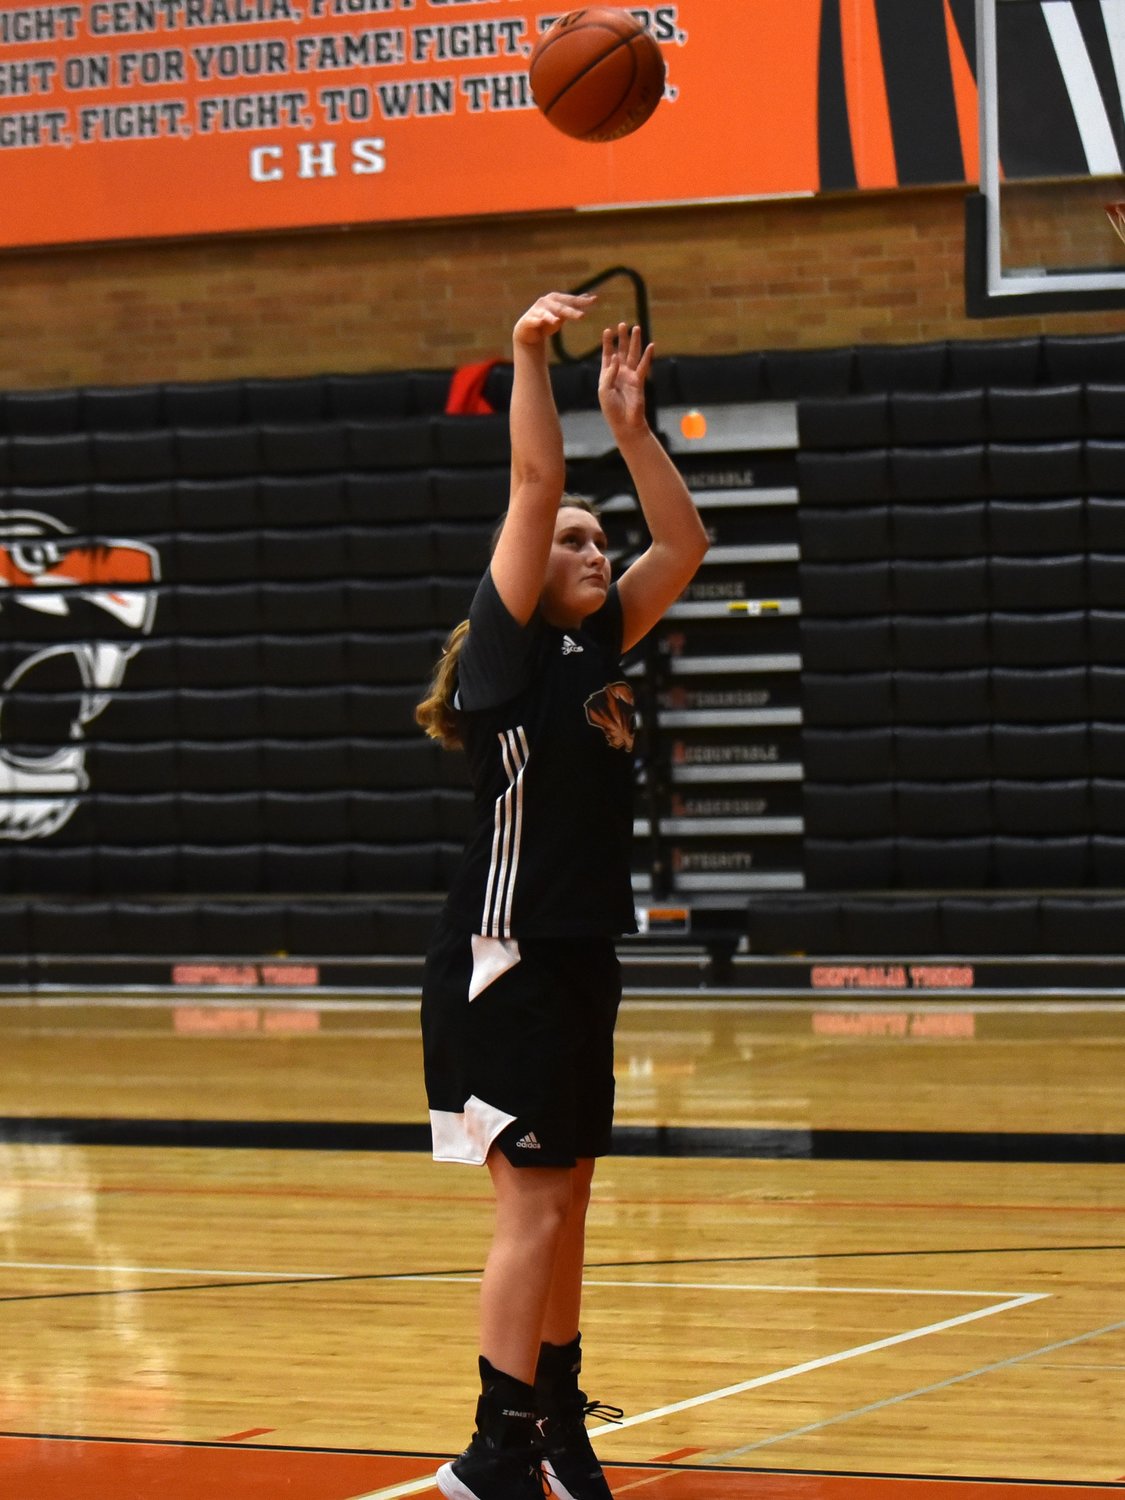 Centralia junior Emily Wilkerson shoots the ball during a drill at the Tigers' practice on Nov. 23.